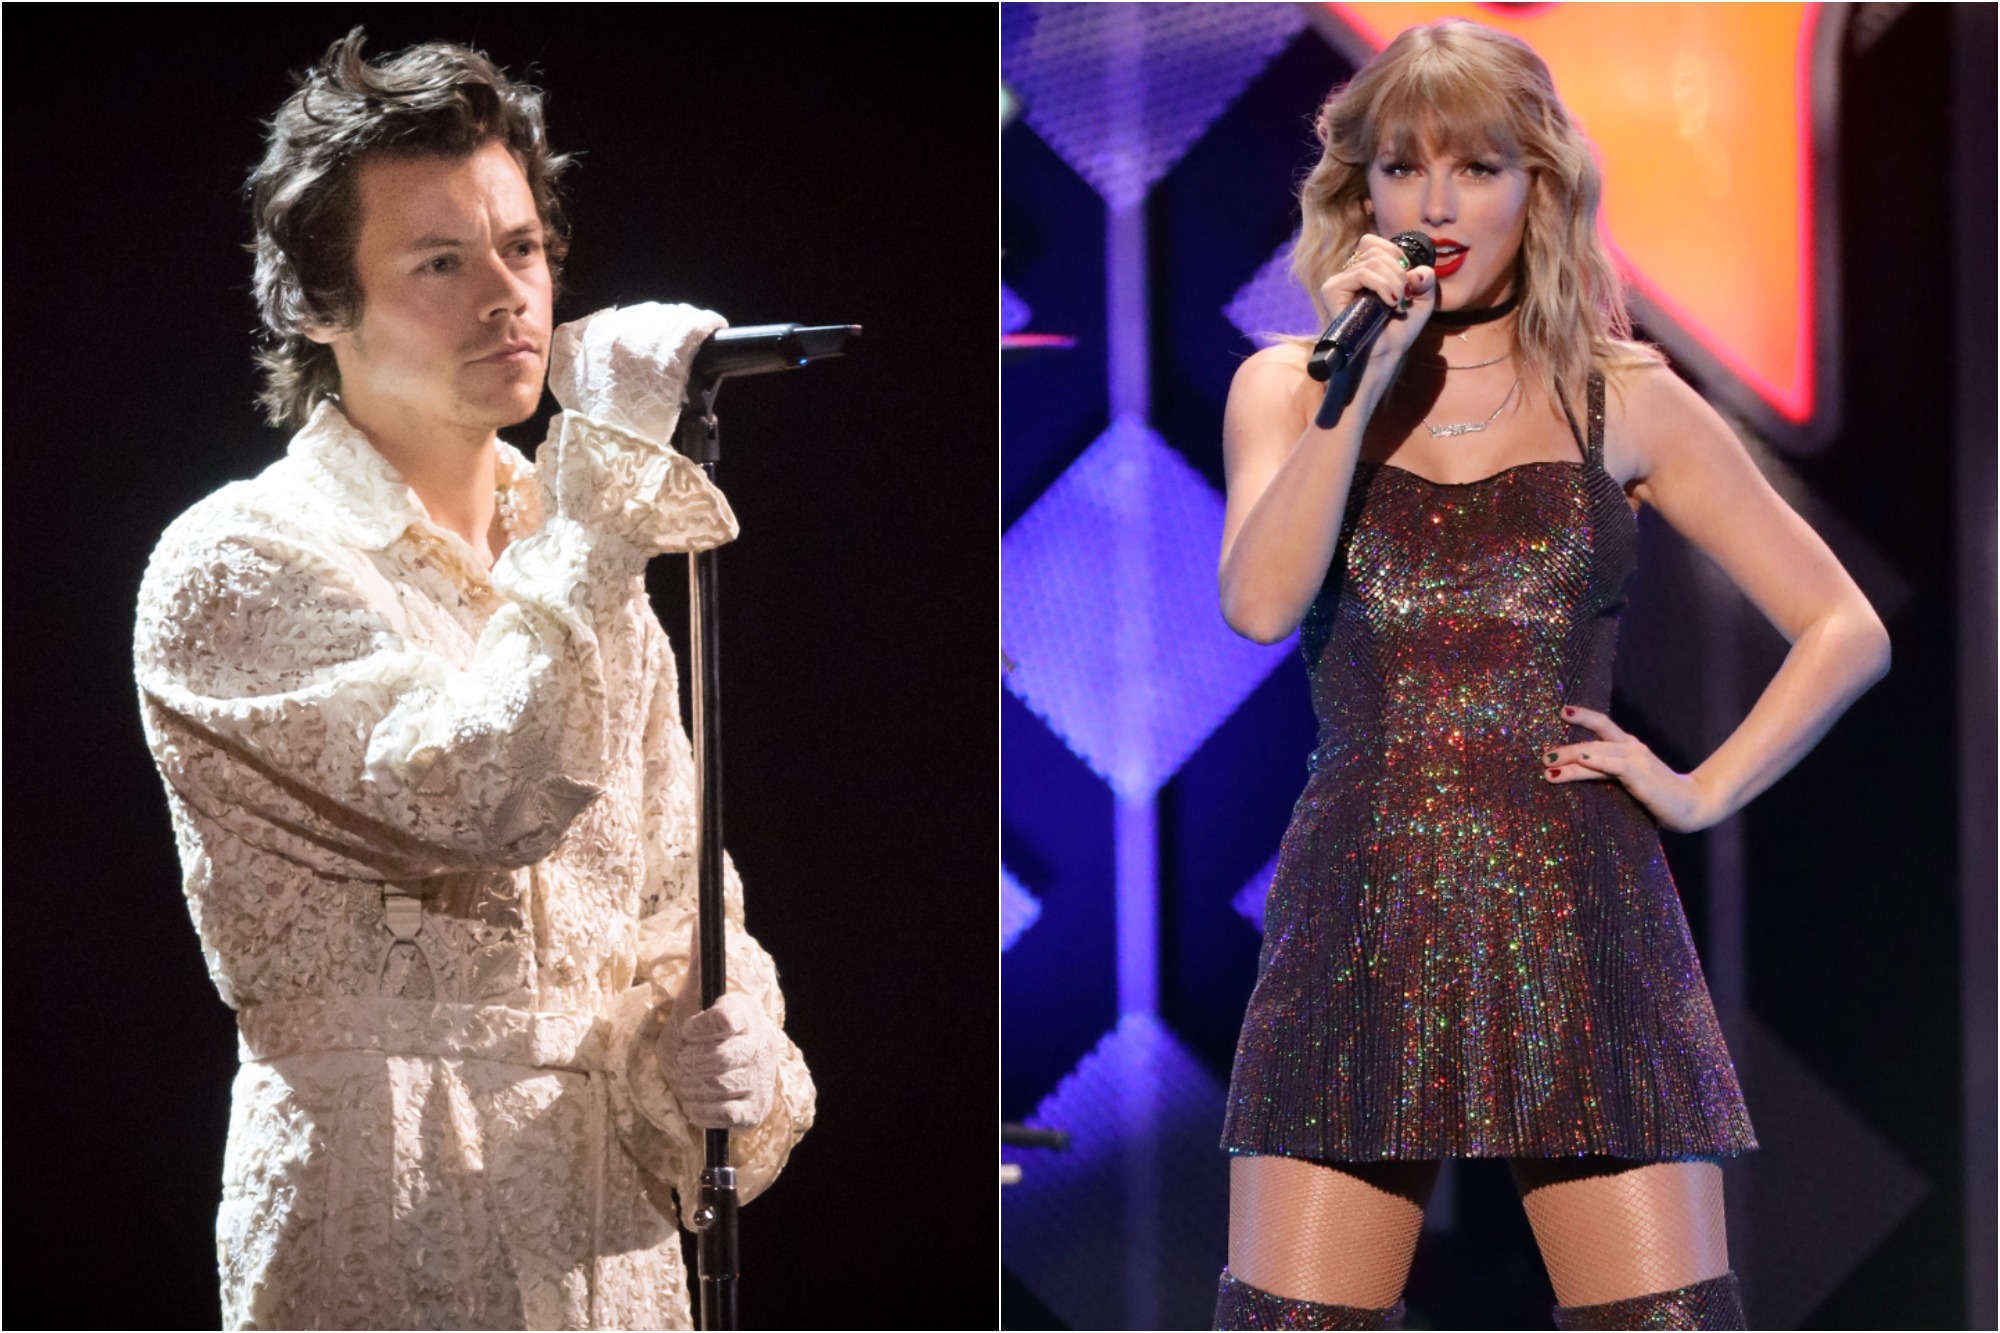 Harry Styles peforms during The BRIT Awards 2020 at The O2 Arena on Feb. 18, 2020/  Taylor Swift performs during the 2019 Z100 Jingle Ball at Madison Square Garden on Dec. 13, 2019.